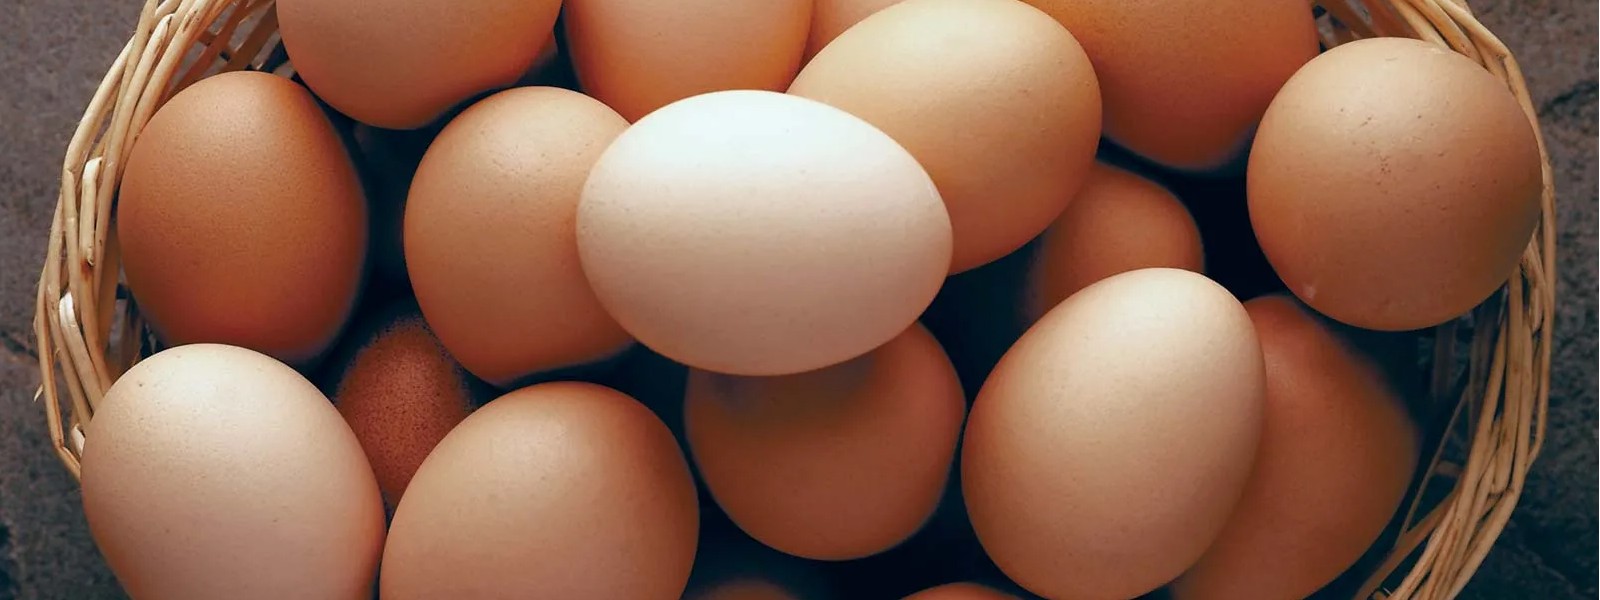 Eggs for wholesale traders at Rs. 46/-